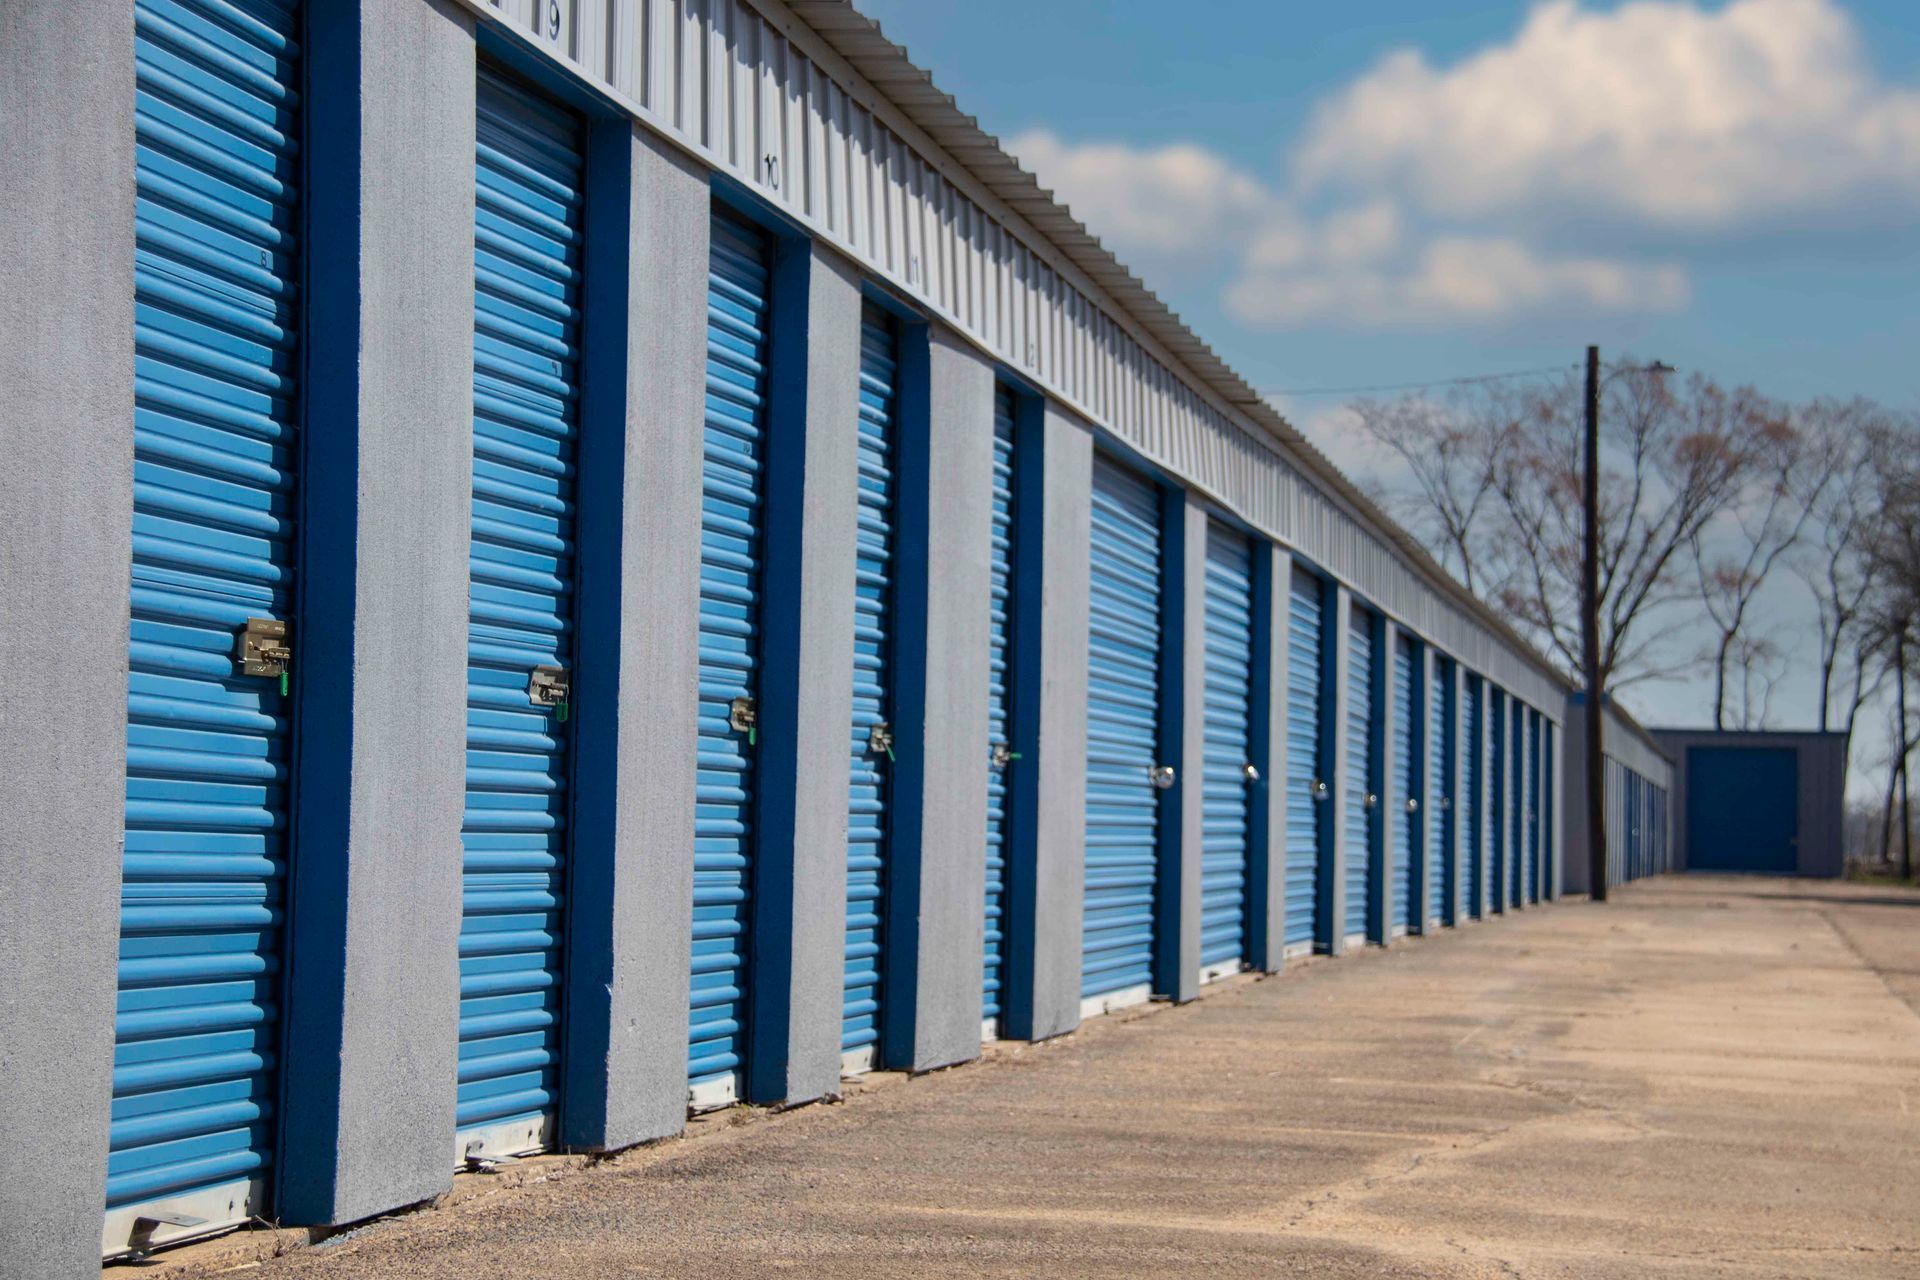 A row of drive up storage units